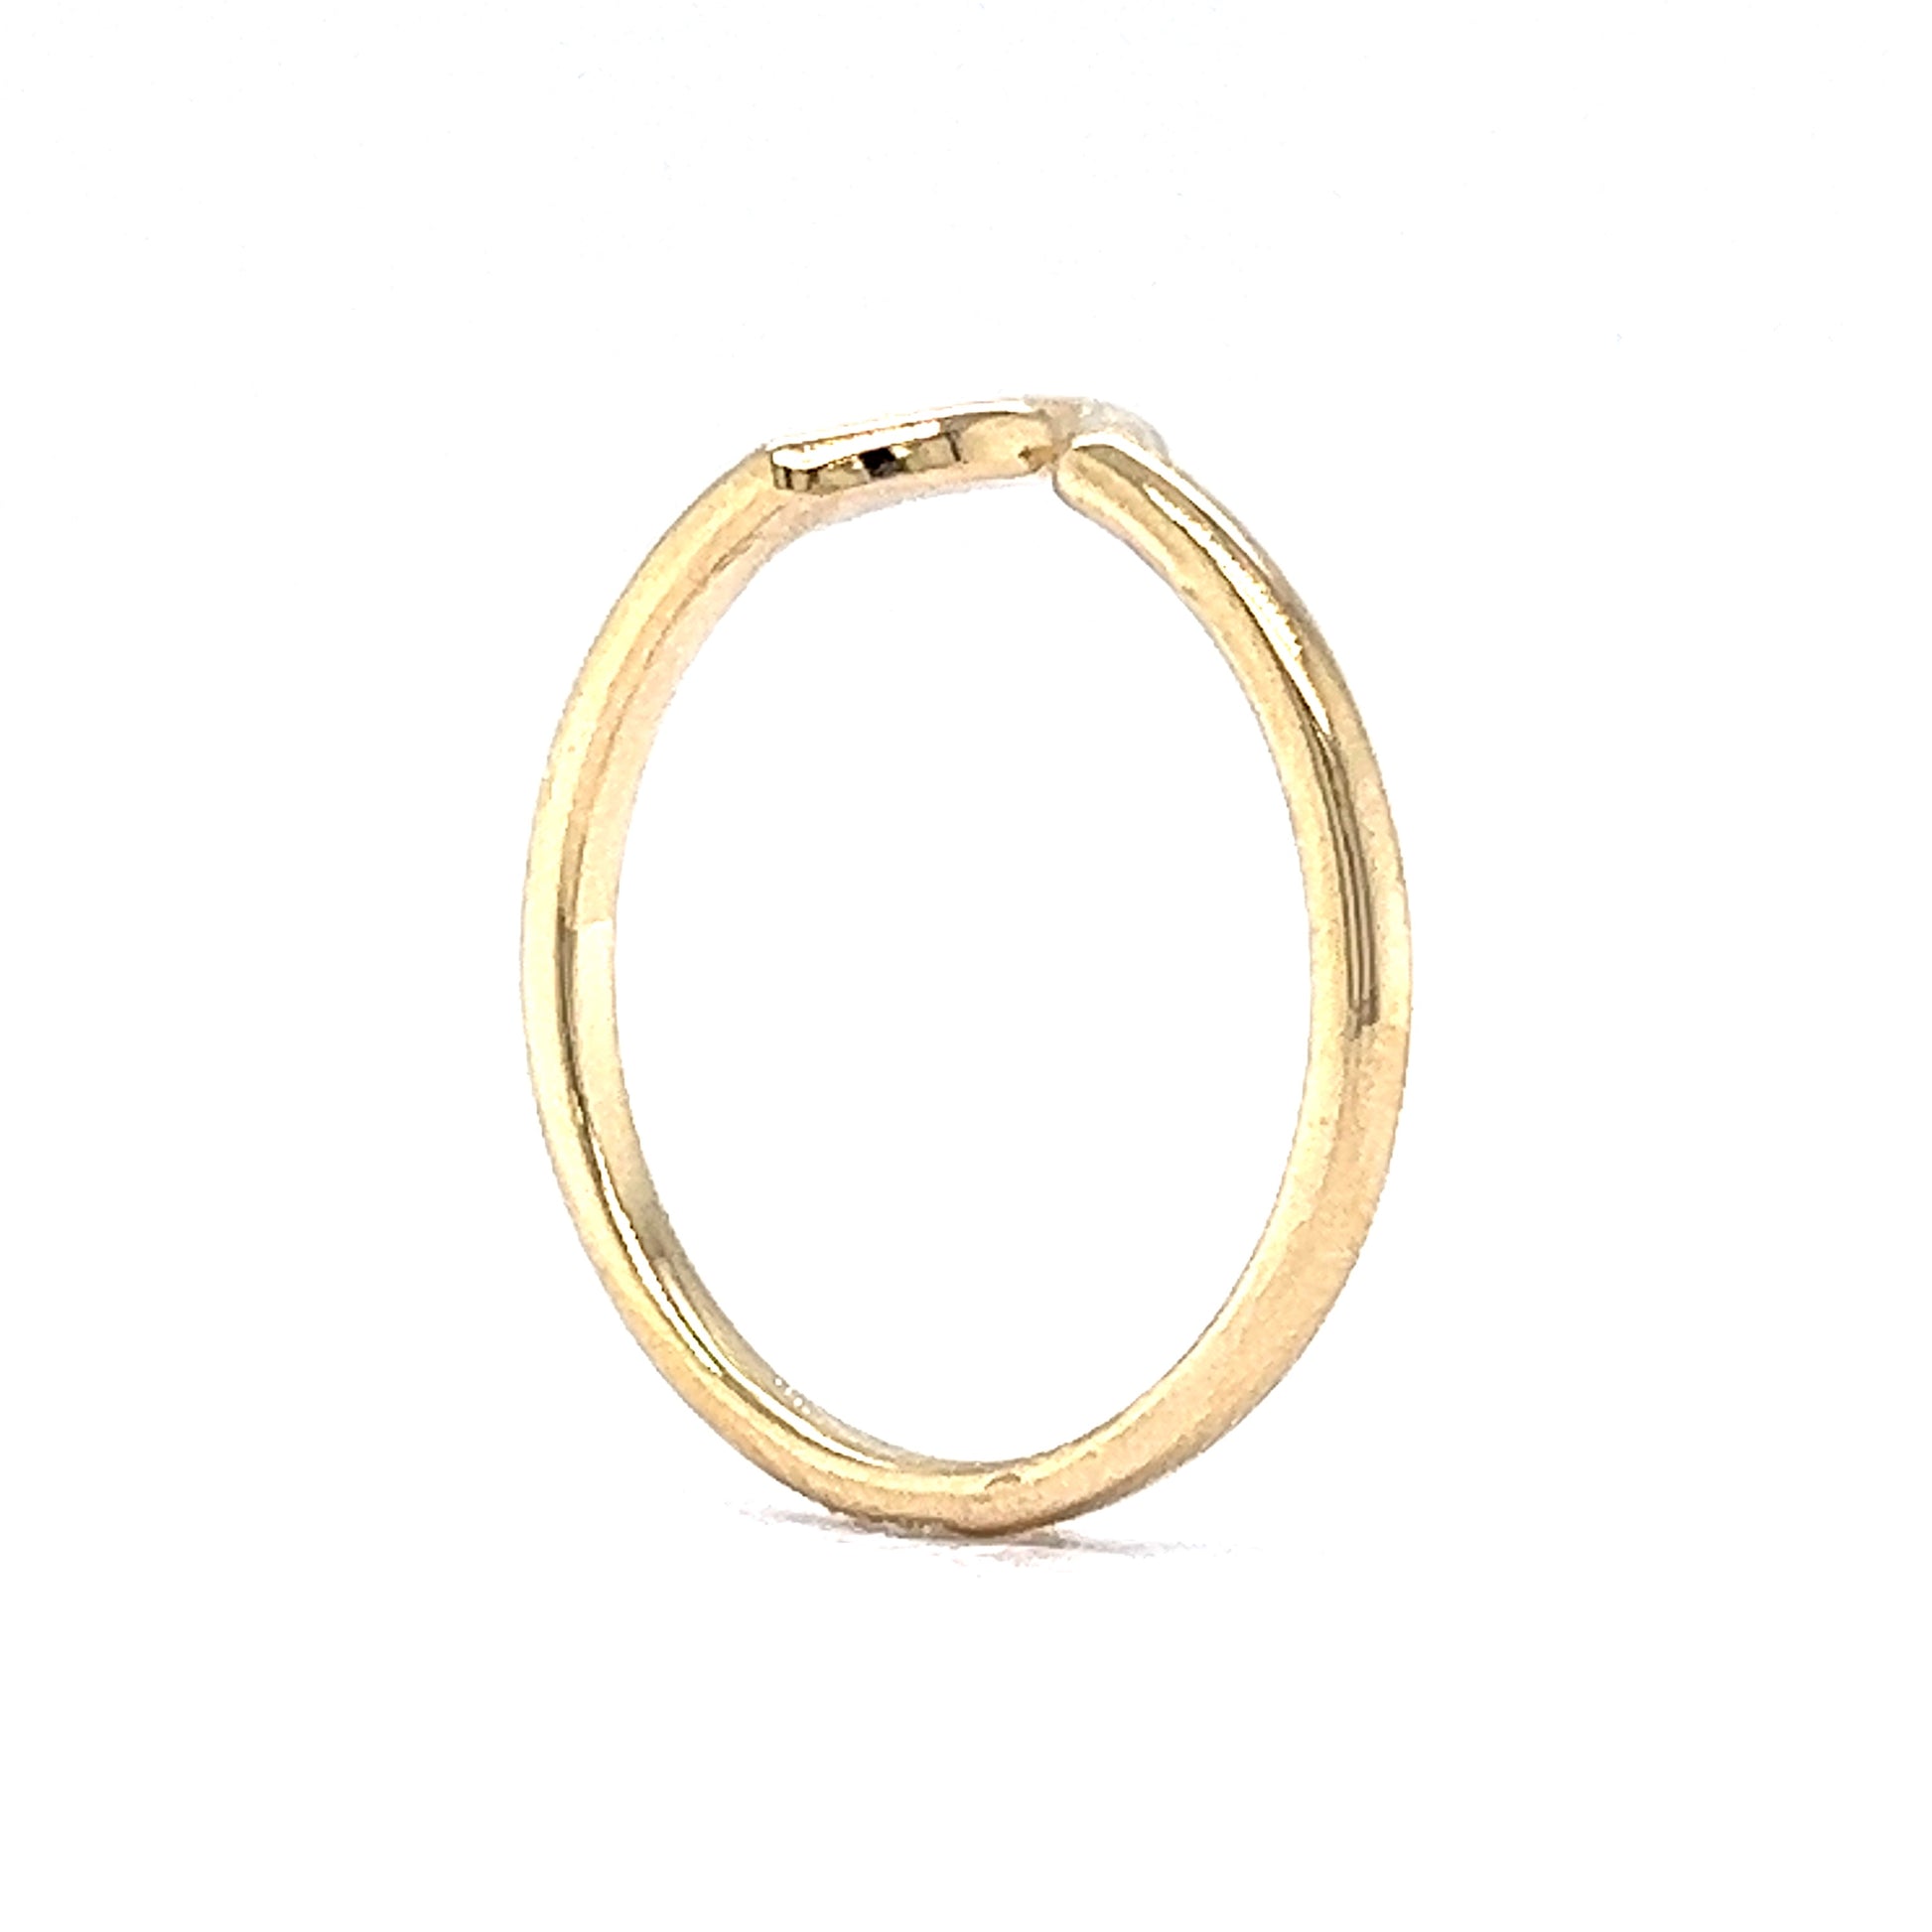 Half Moon Curved Wedding Band in 14k Yellow GoldComposition: 14 Karat Yellow Gold Ring Size: 7.0 Total Gram Weight: 1.4 g Inscription: 14k
      